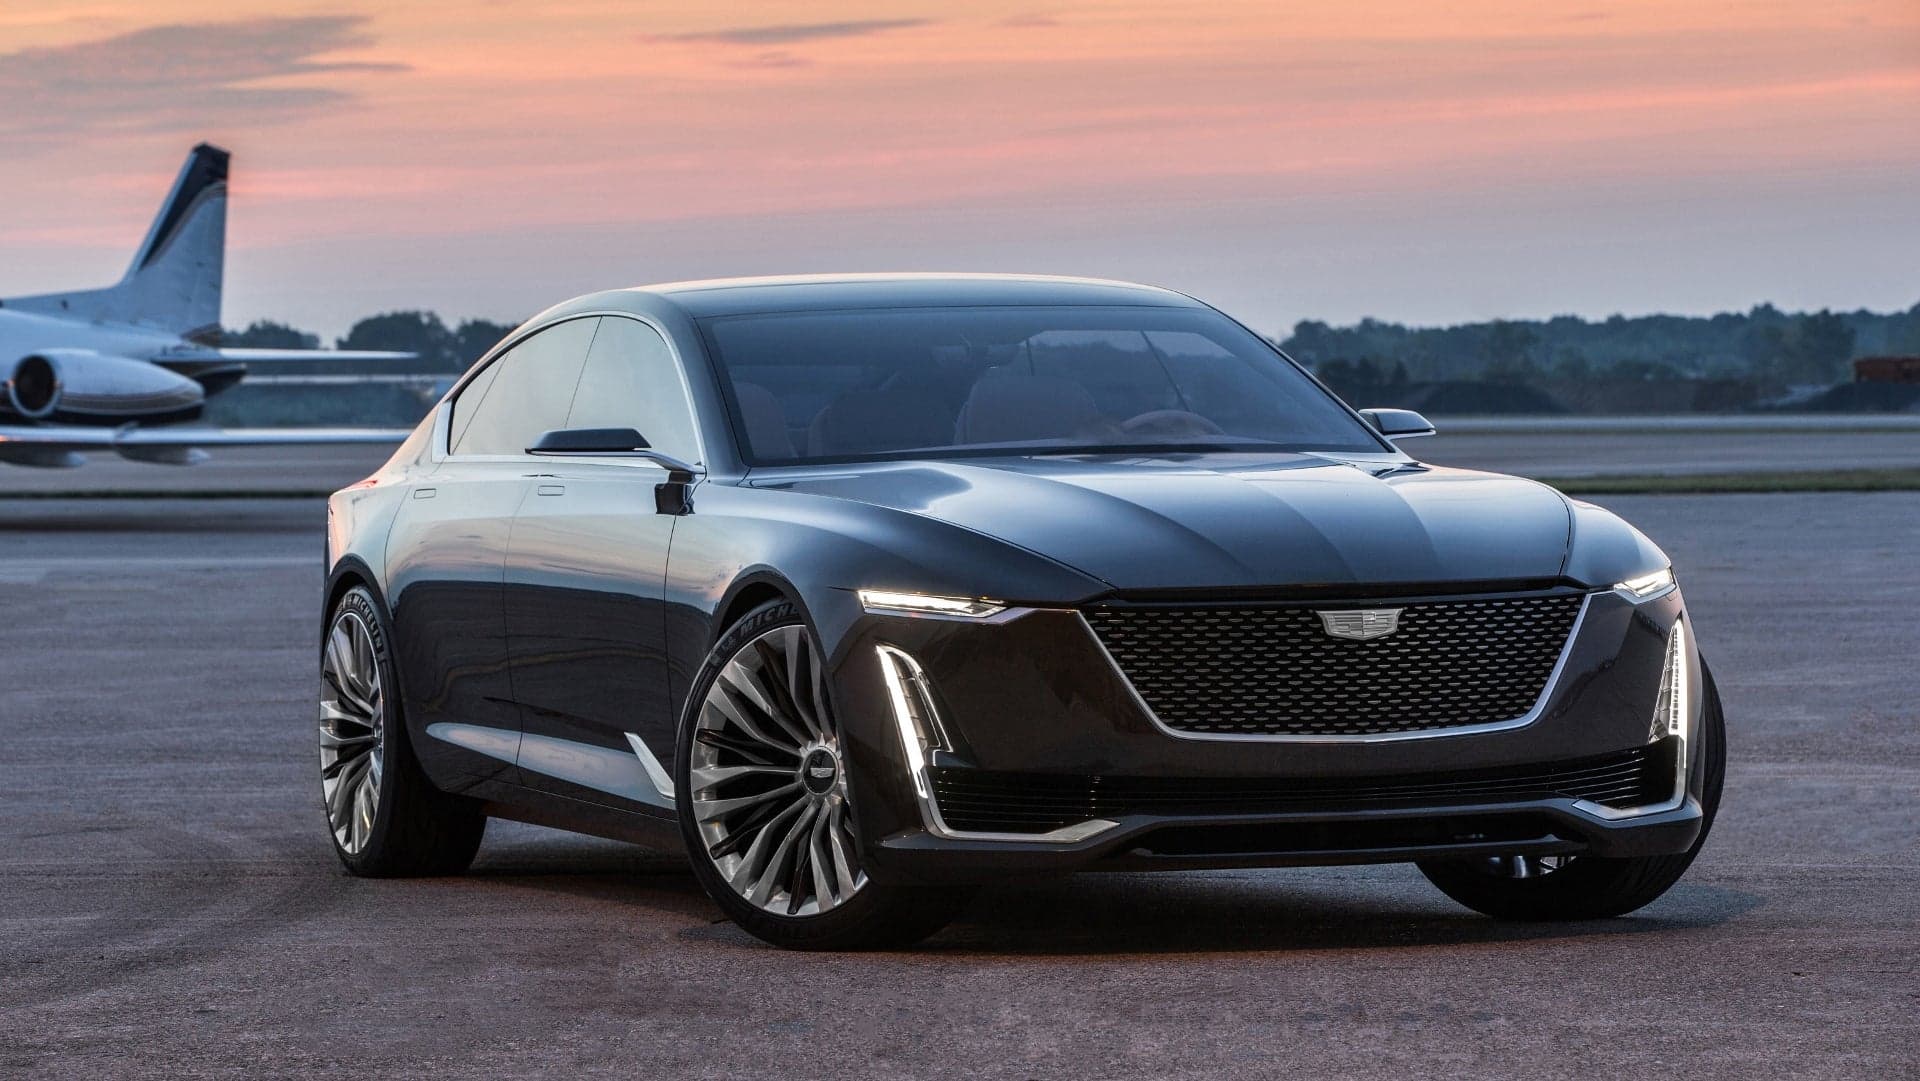 GM Investing $175 Million in the Next Generation of Cadillac Sedans